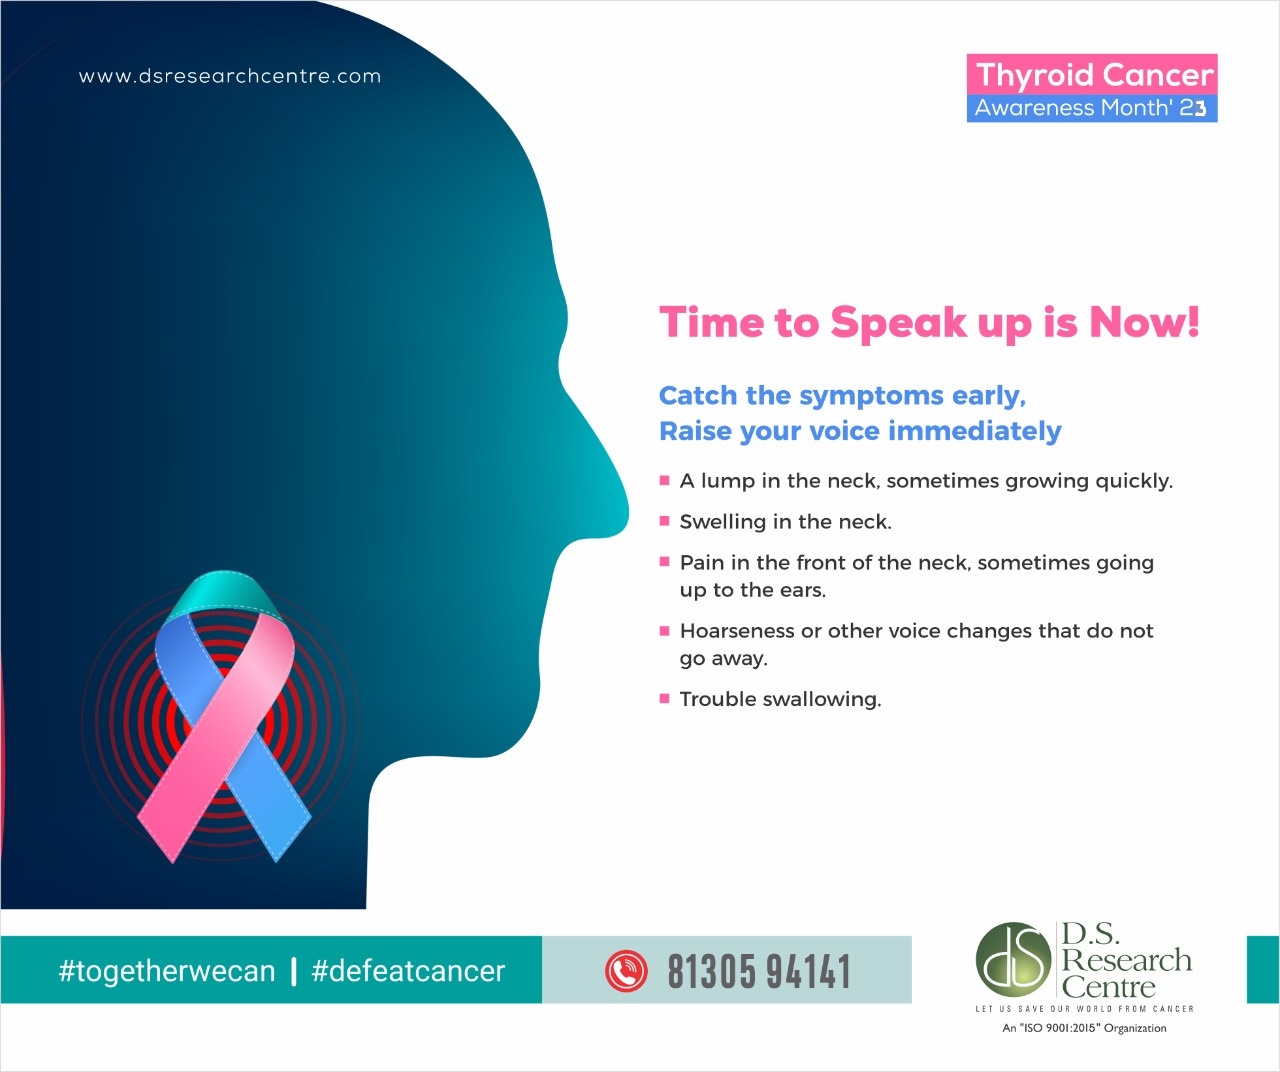 Do not Loose Your Voice - Thyroid Cancer Awareness Month